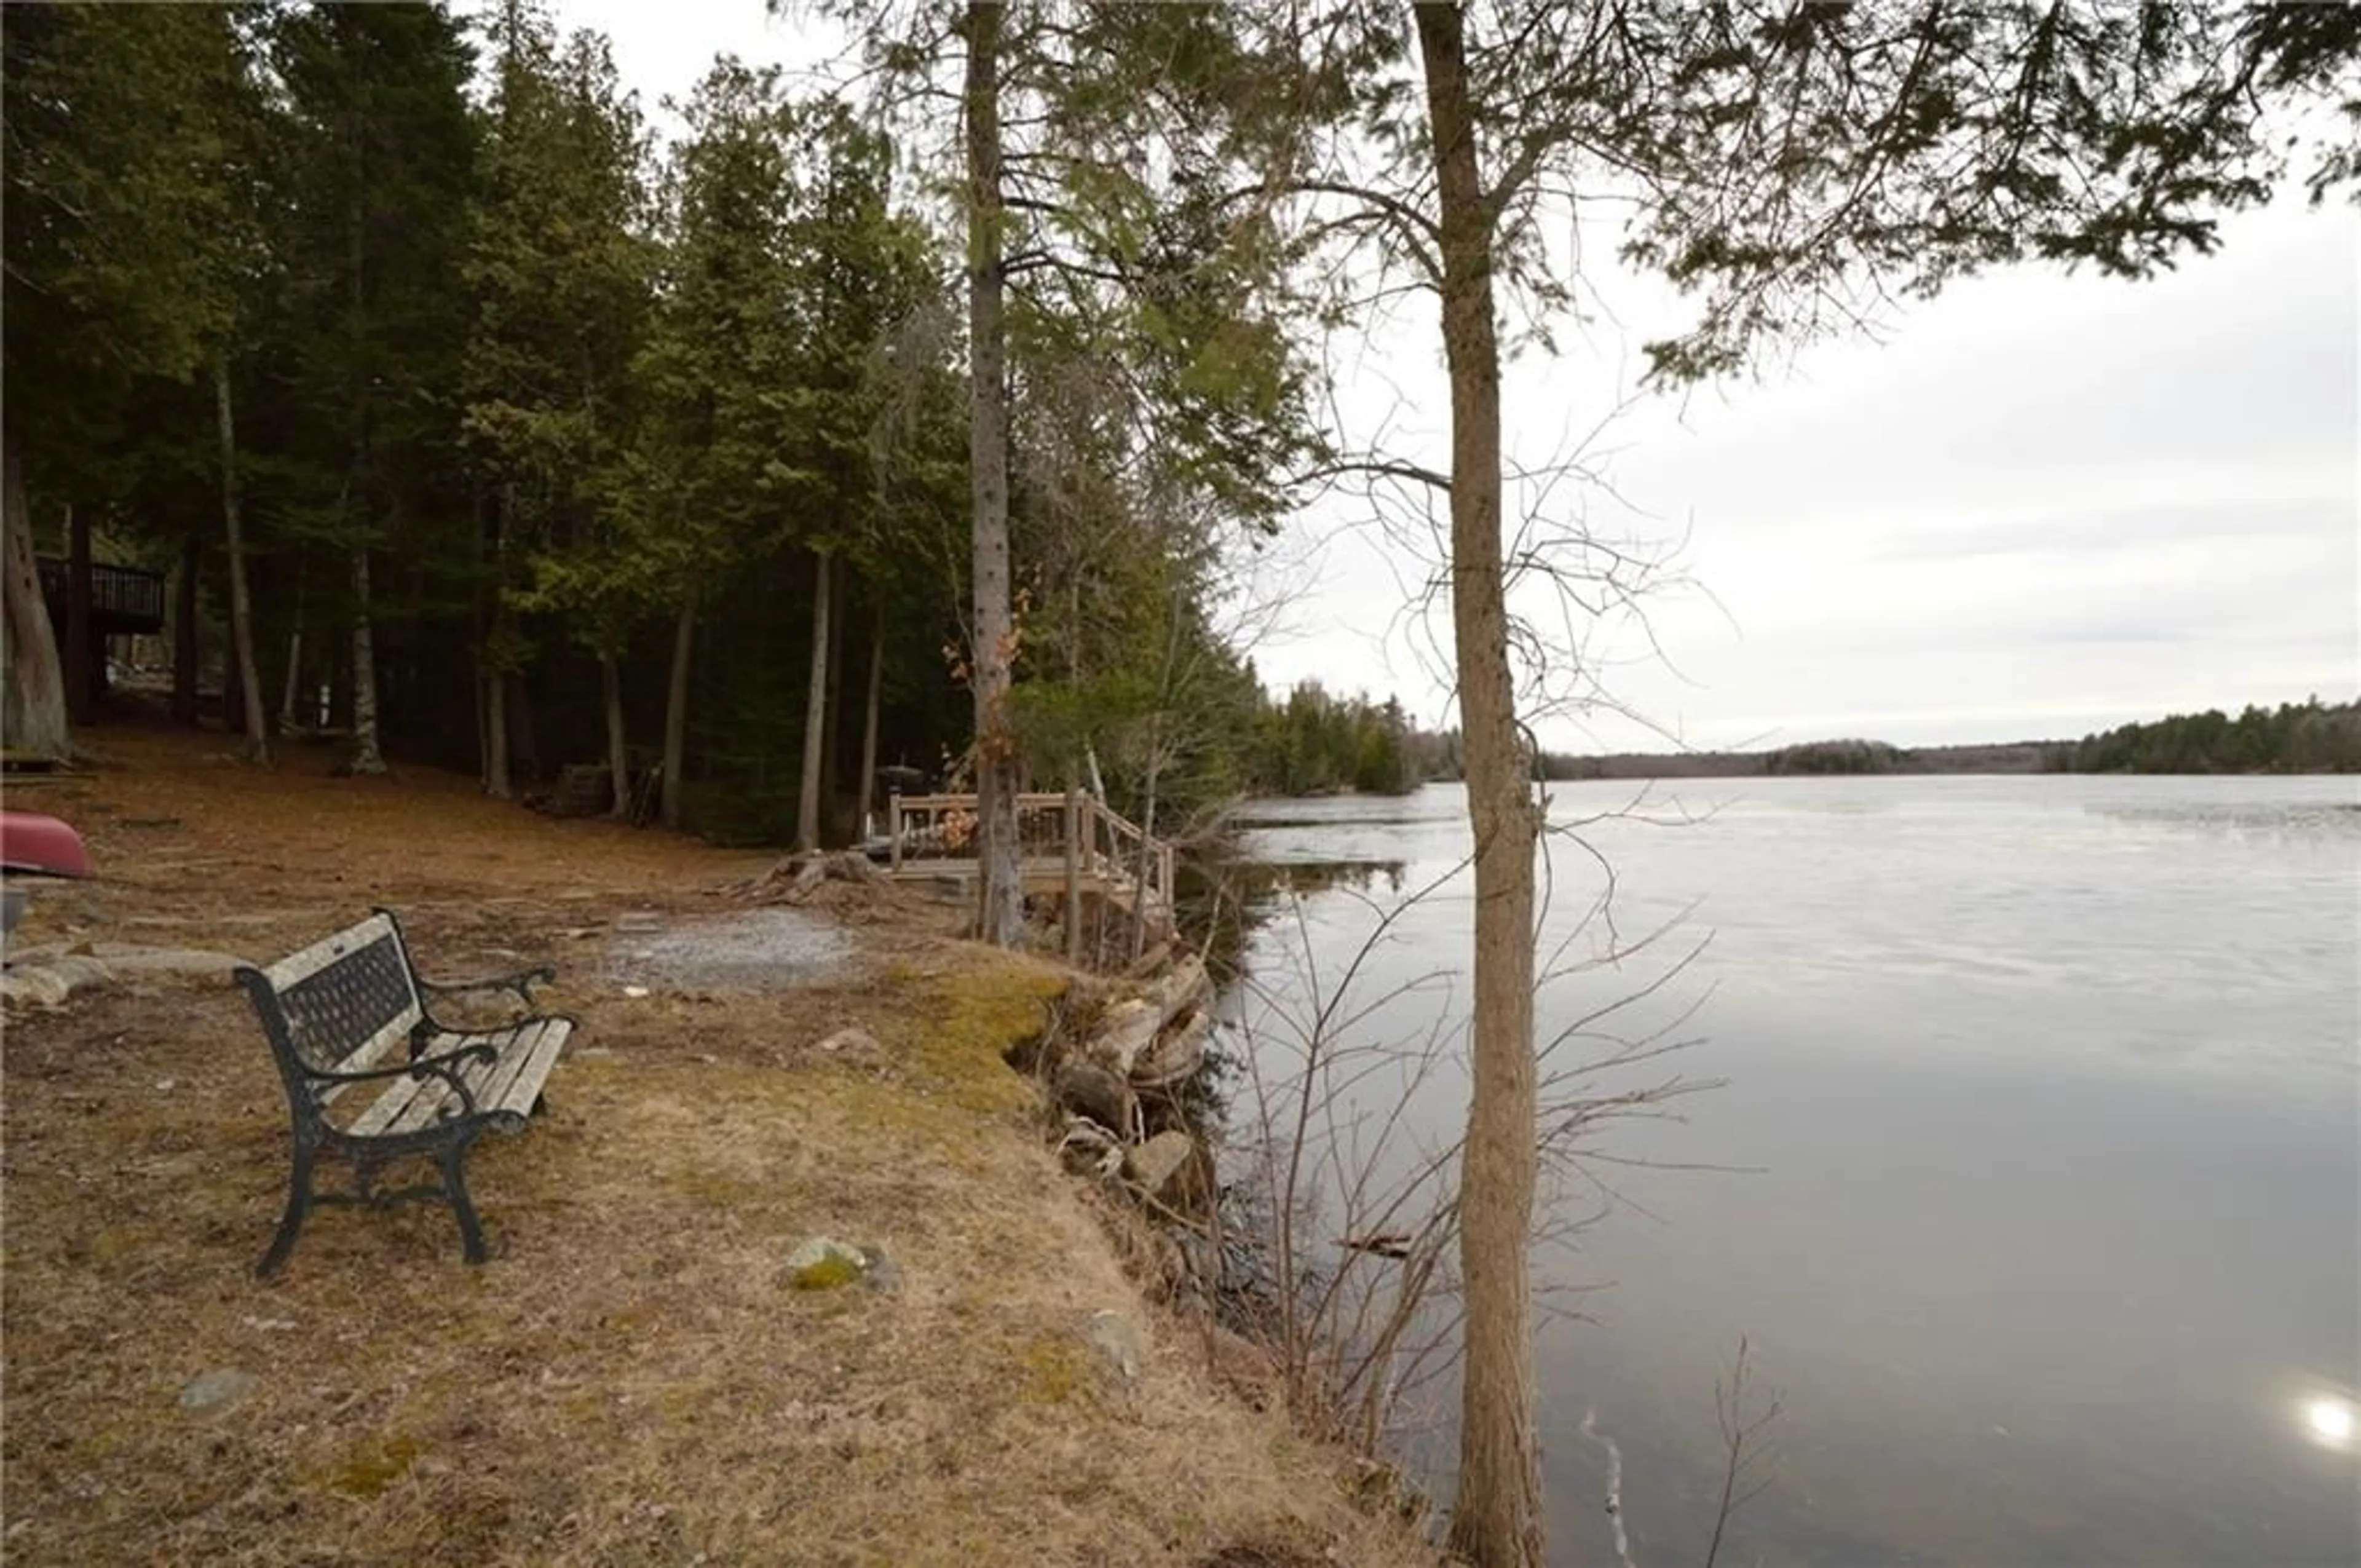 Lakeview for 357 CLEAR LAKE LANE 11 Rd, Maberly Ontario K0H 2B0